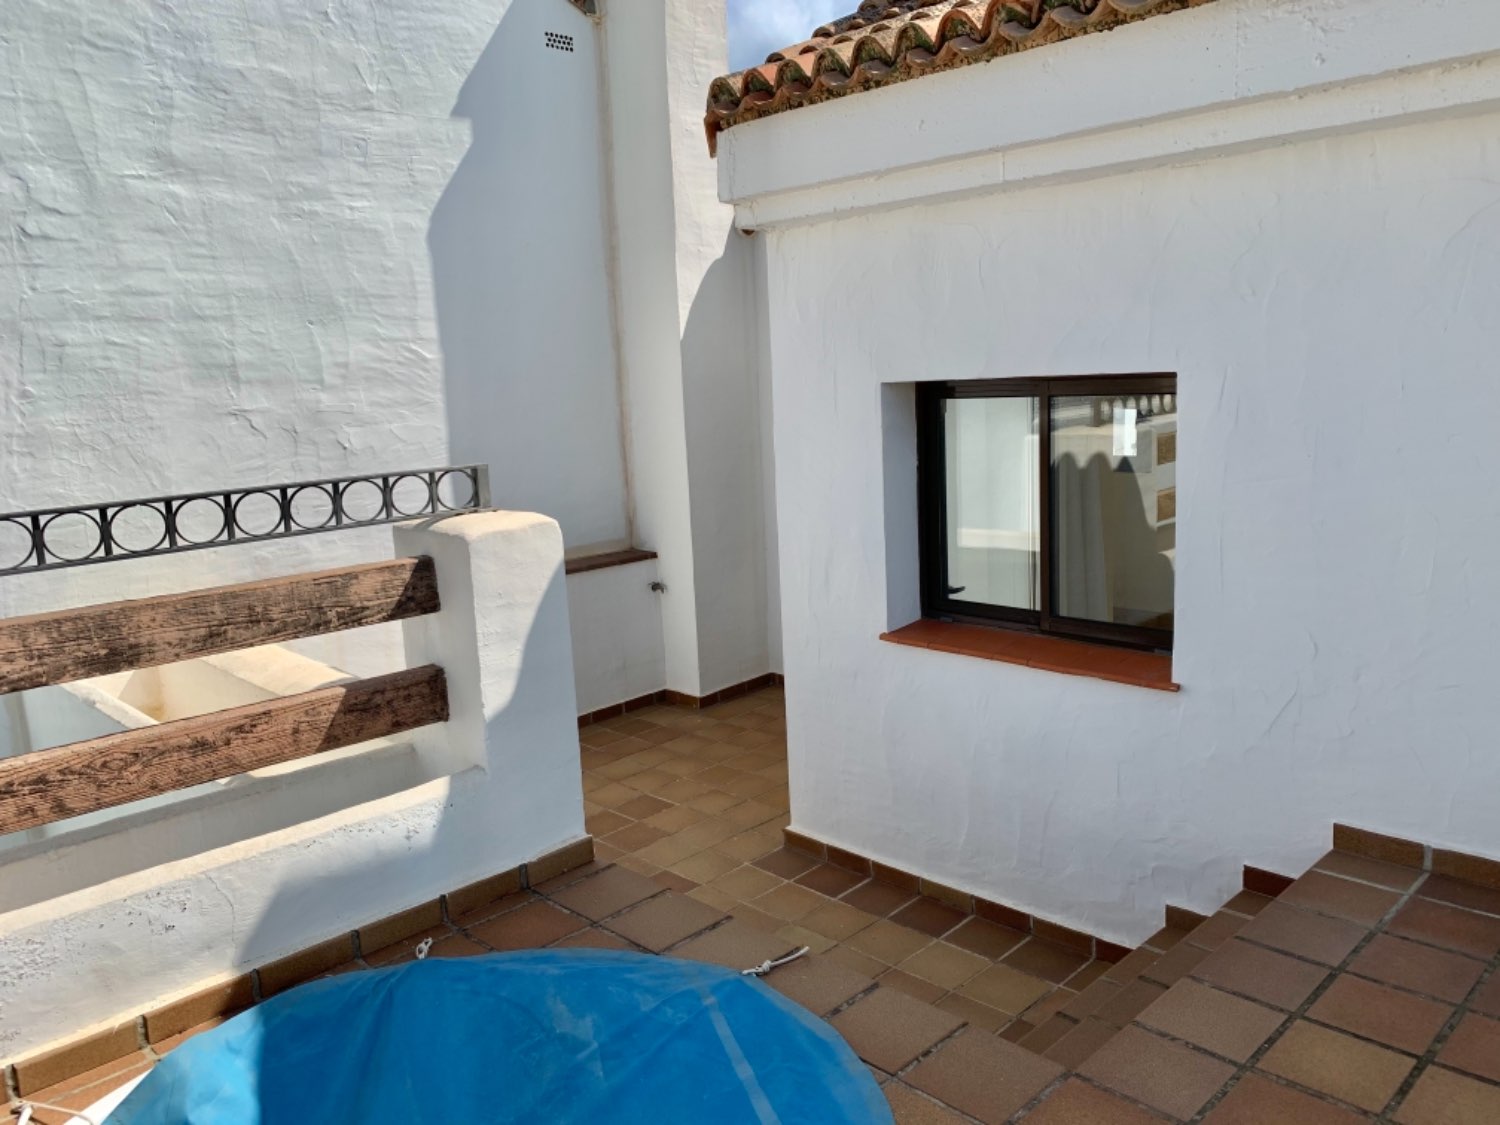 Charming four bedroom townhouse in Alcaidesa a few meters from the beach